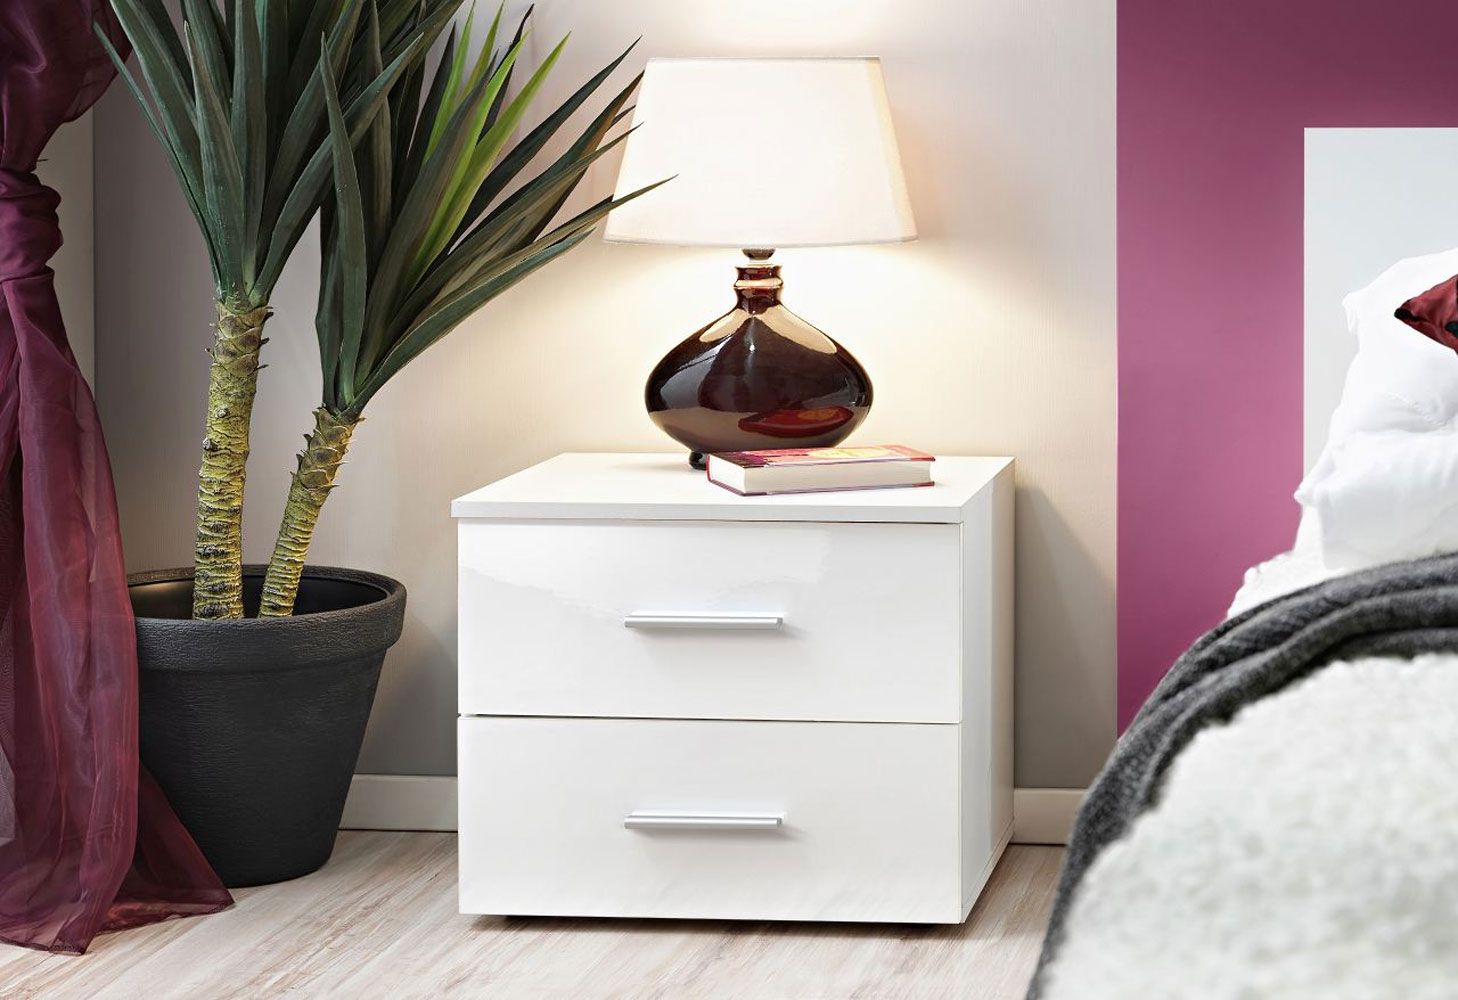 Bedside table with two drawers Salmeli 32, color: white - Dimensions: 40 x 50 x 40 cm (H x W x D)